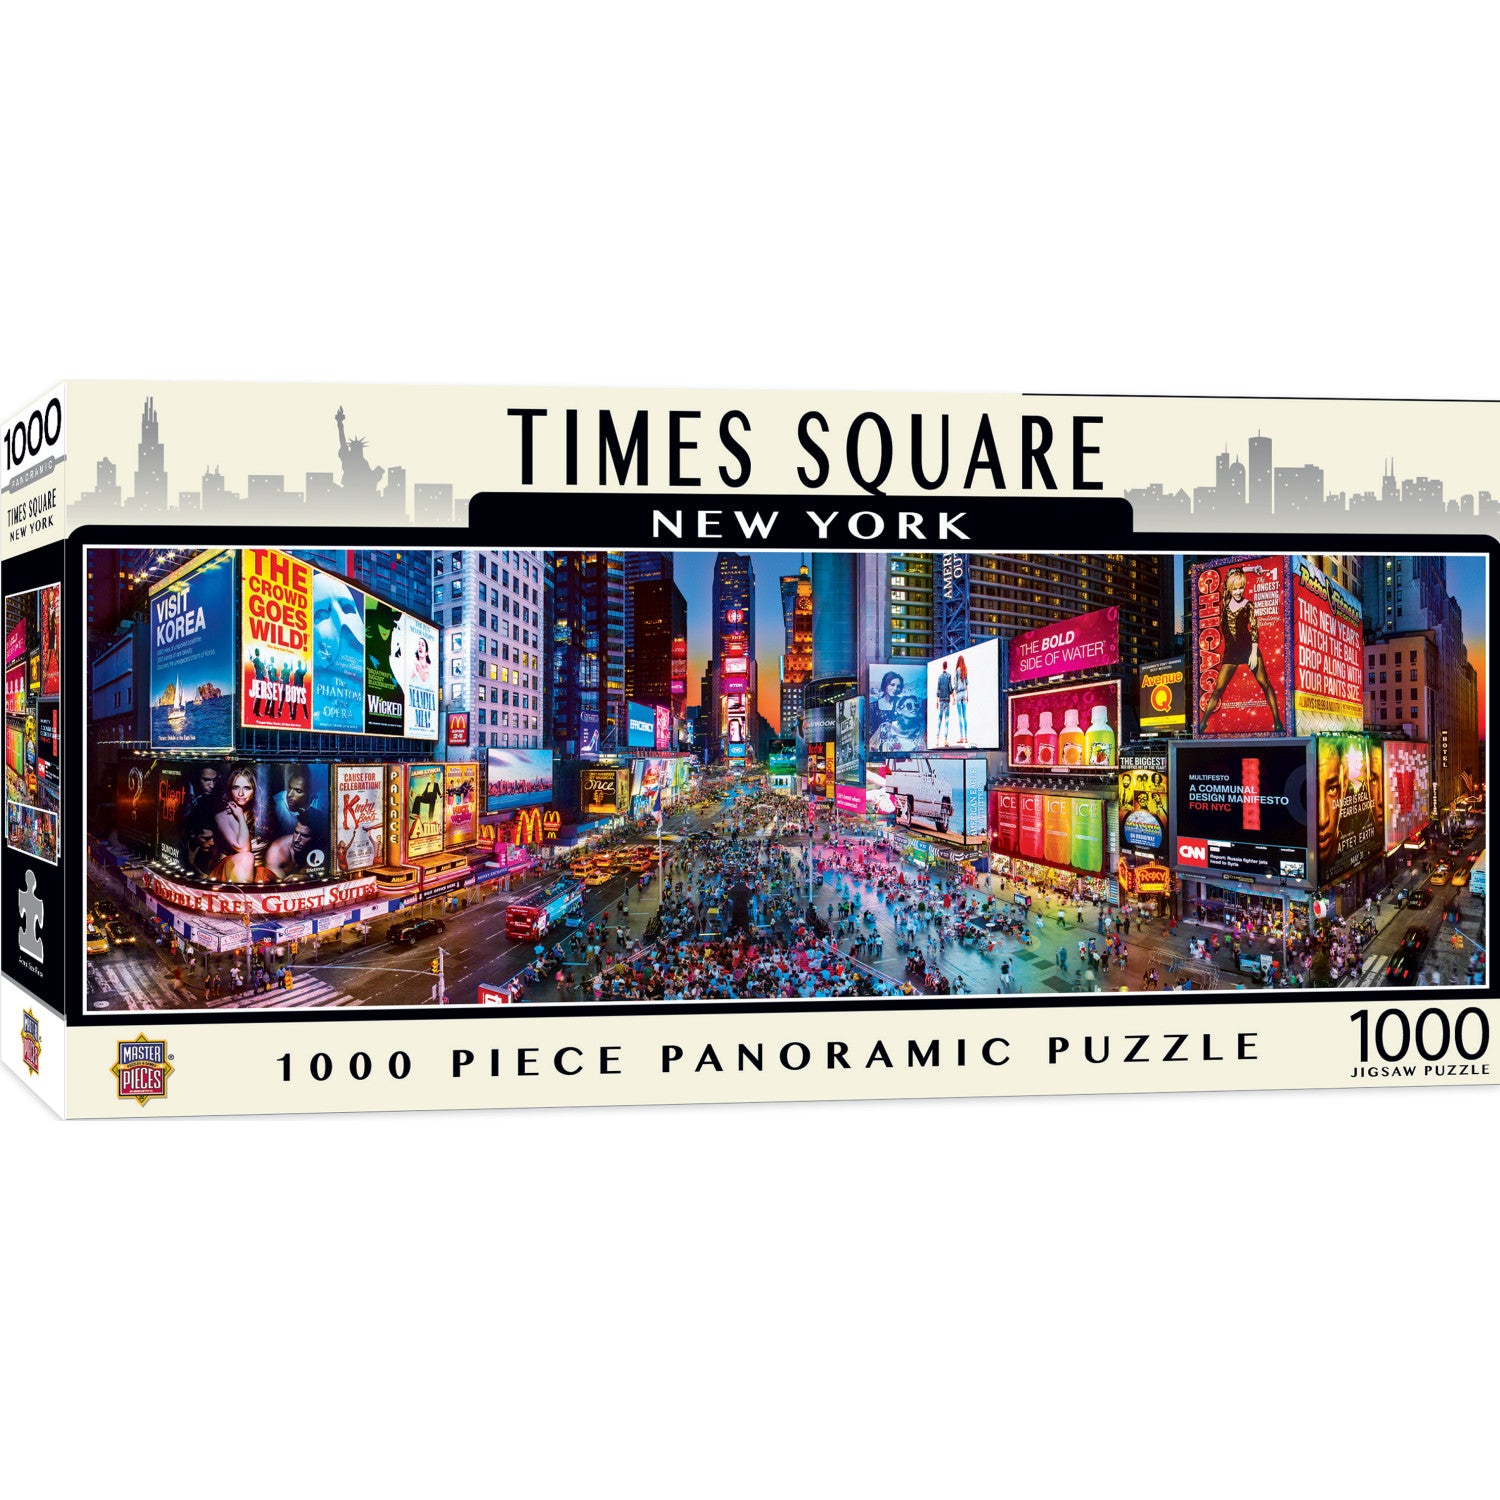 Times Square 1000 Piece Panoramic Puzzle